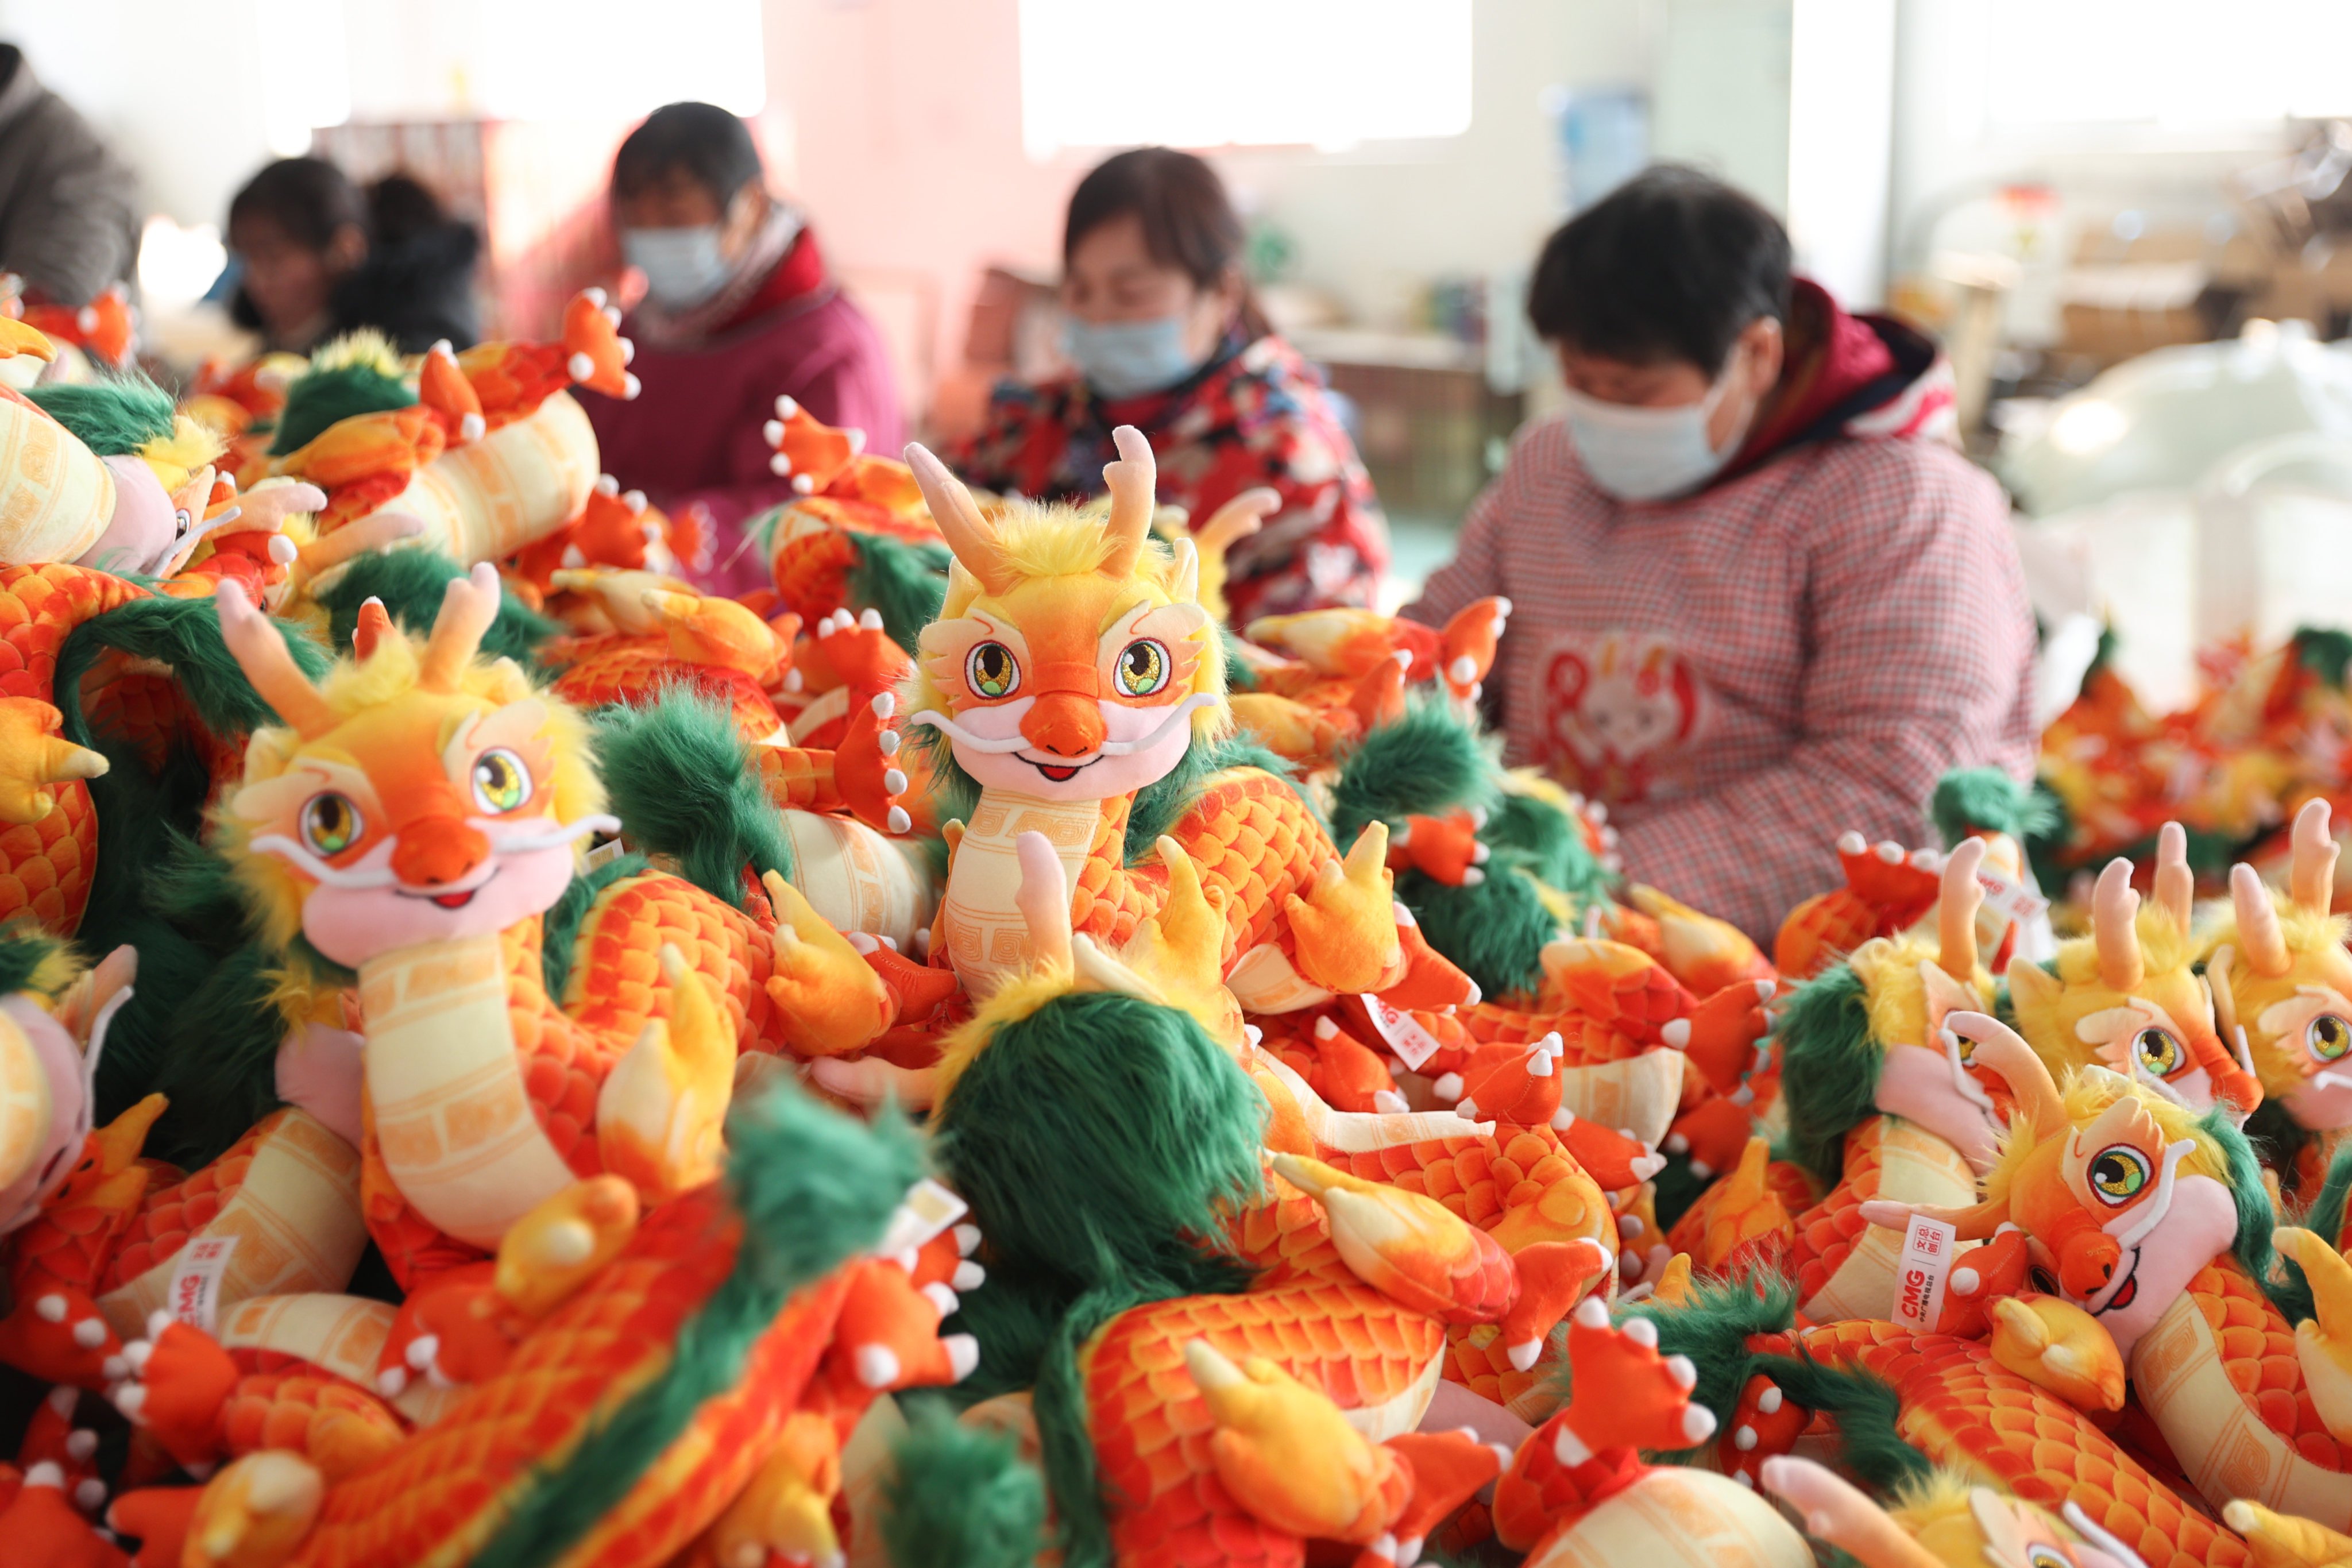 Stable manufacturing activity has been encouraged to keep up growth for 2024, as China works to move into sustained economic recovery. Photo: NurPhoto via Getty Images